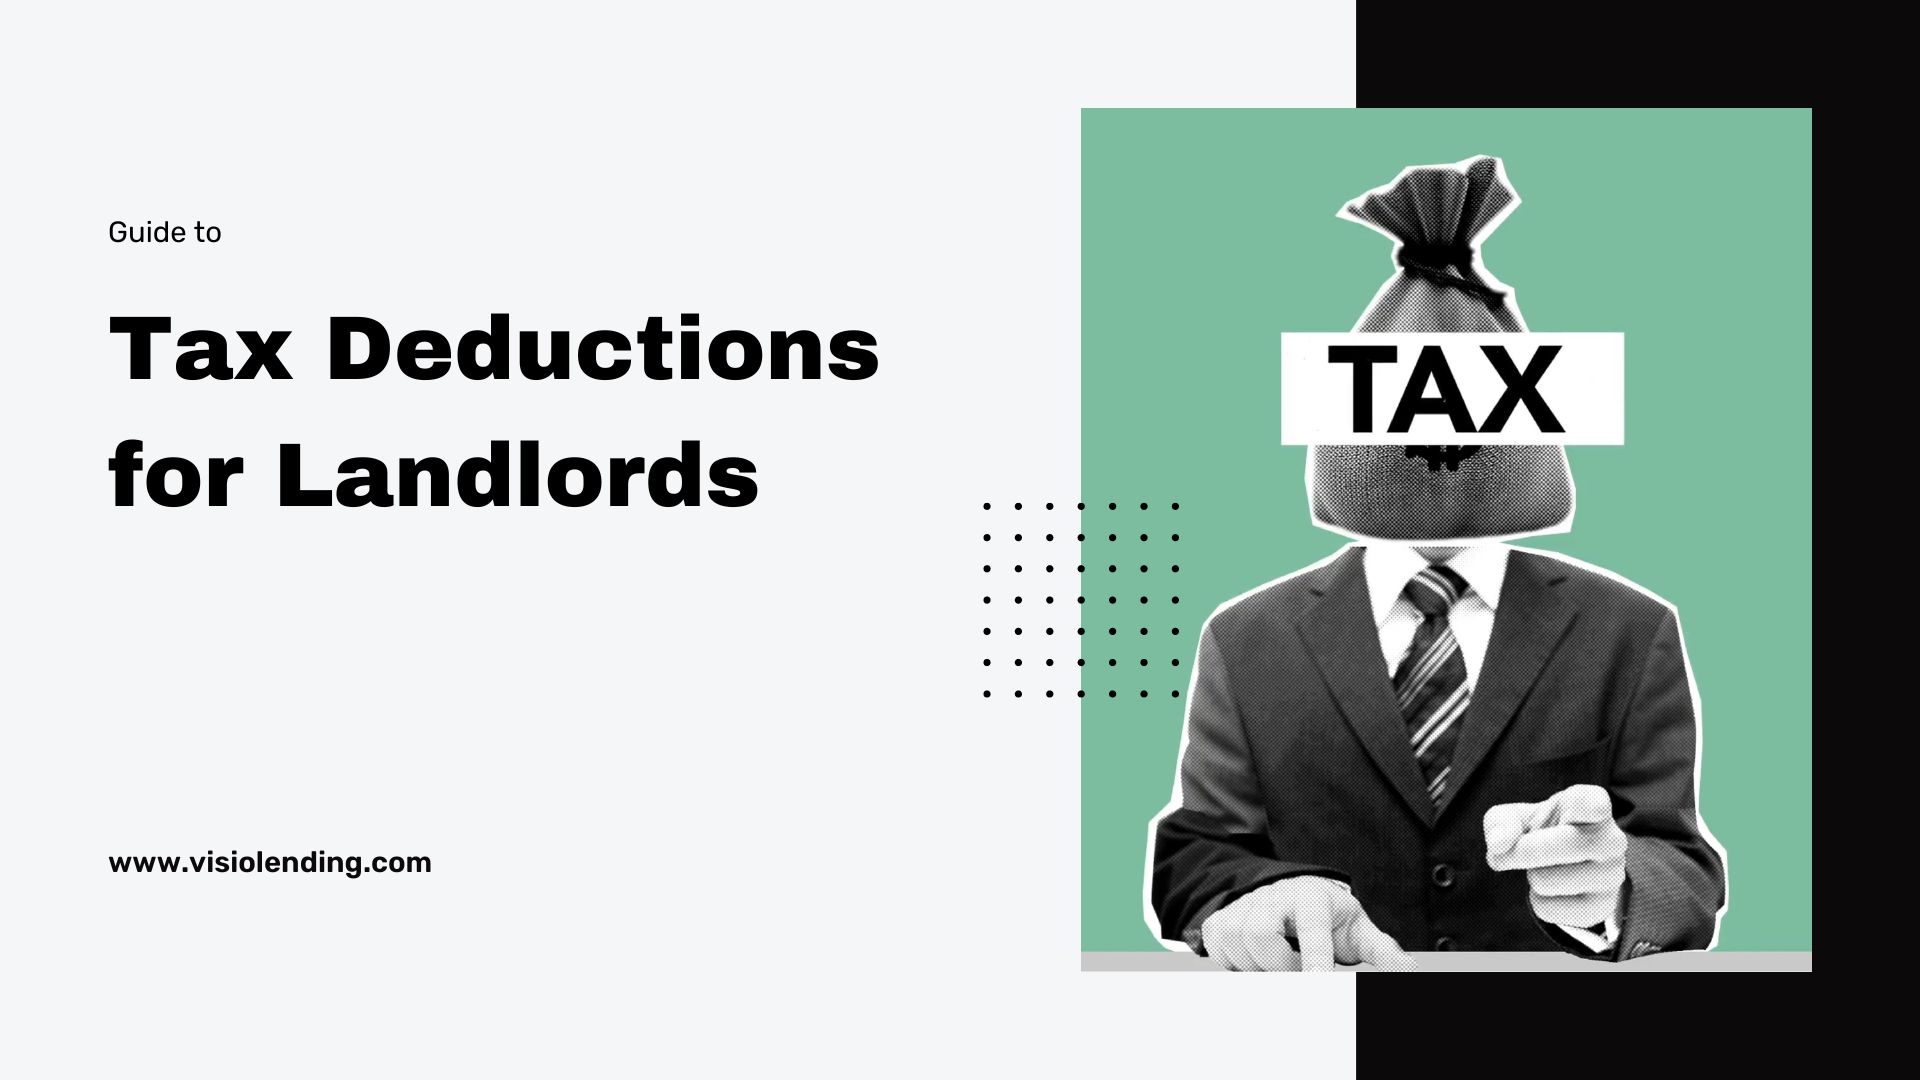 Guide to Tax Deductions for Landlords